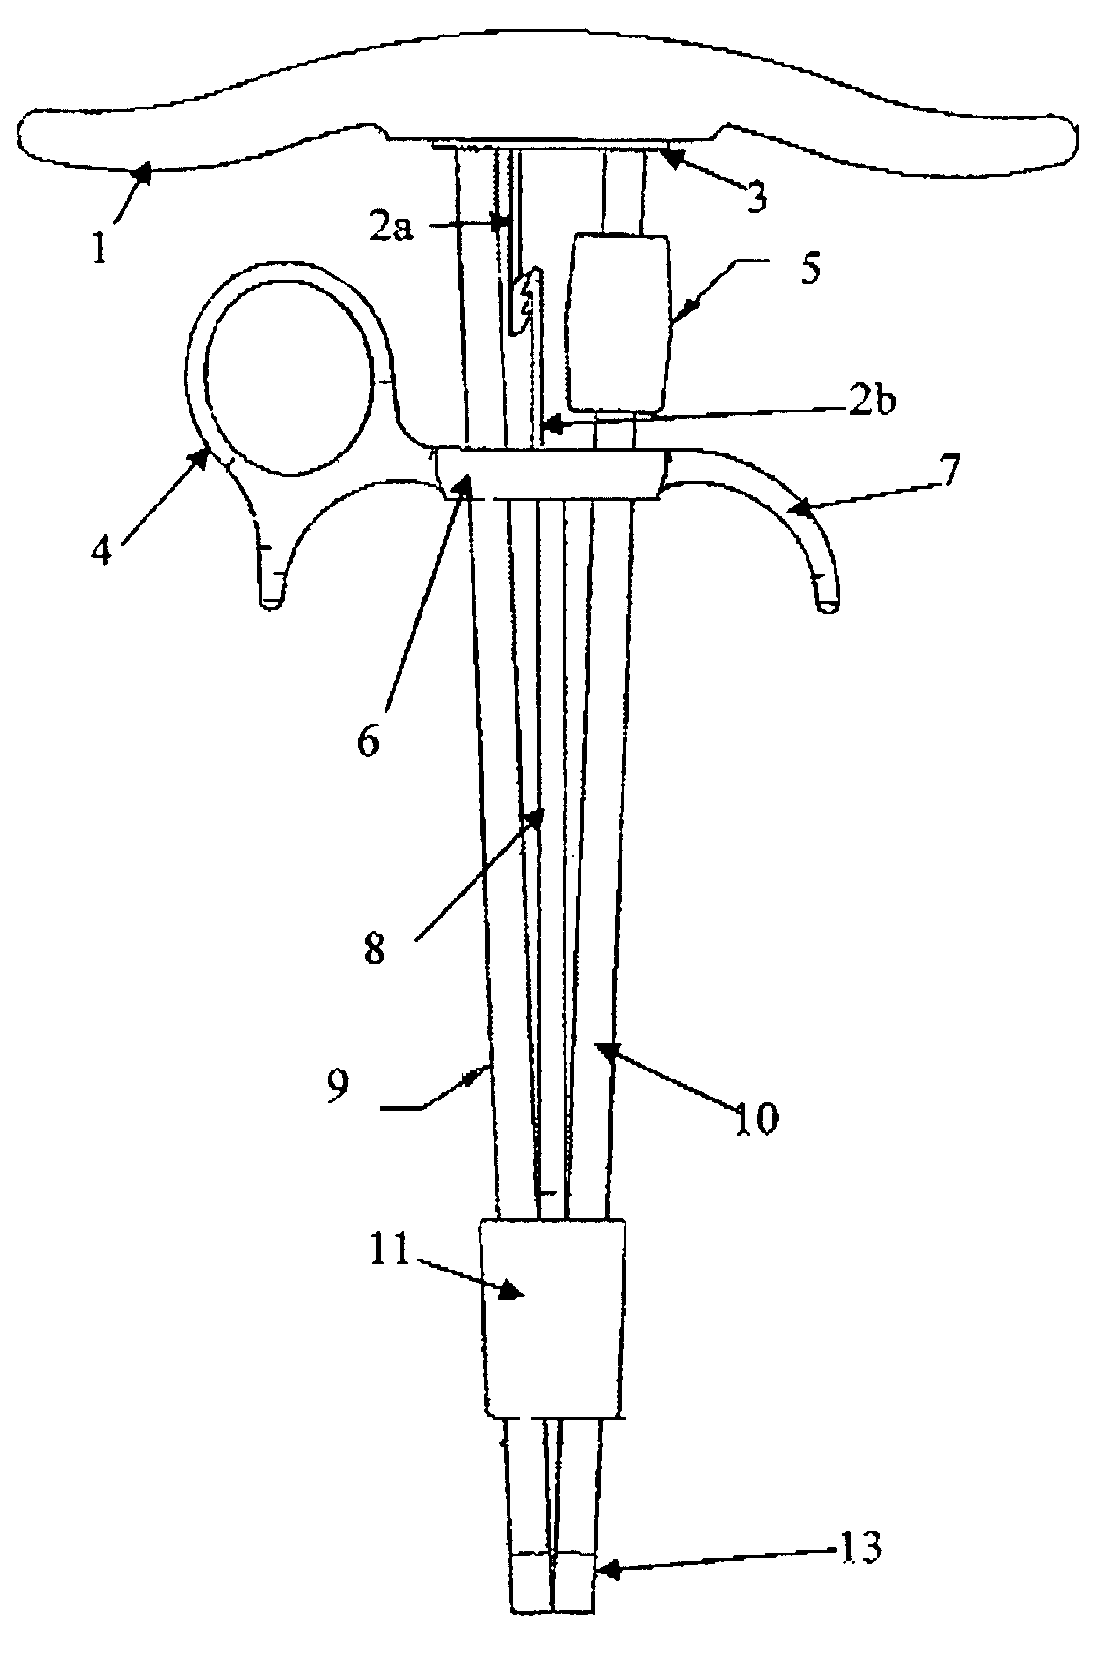 Pull locking rotational action needle driver